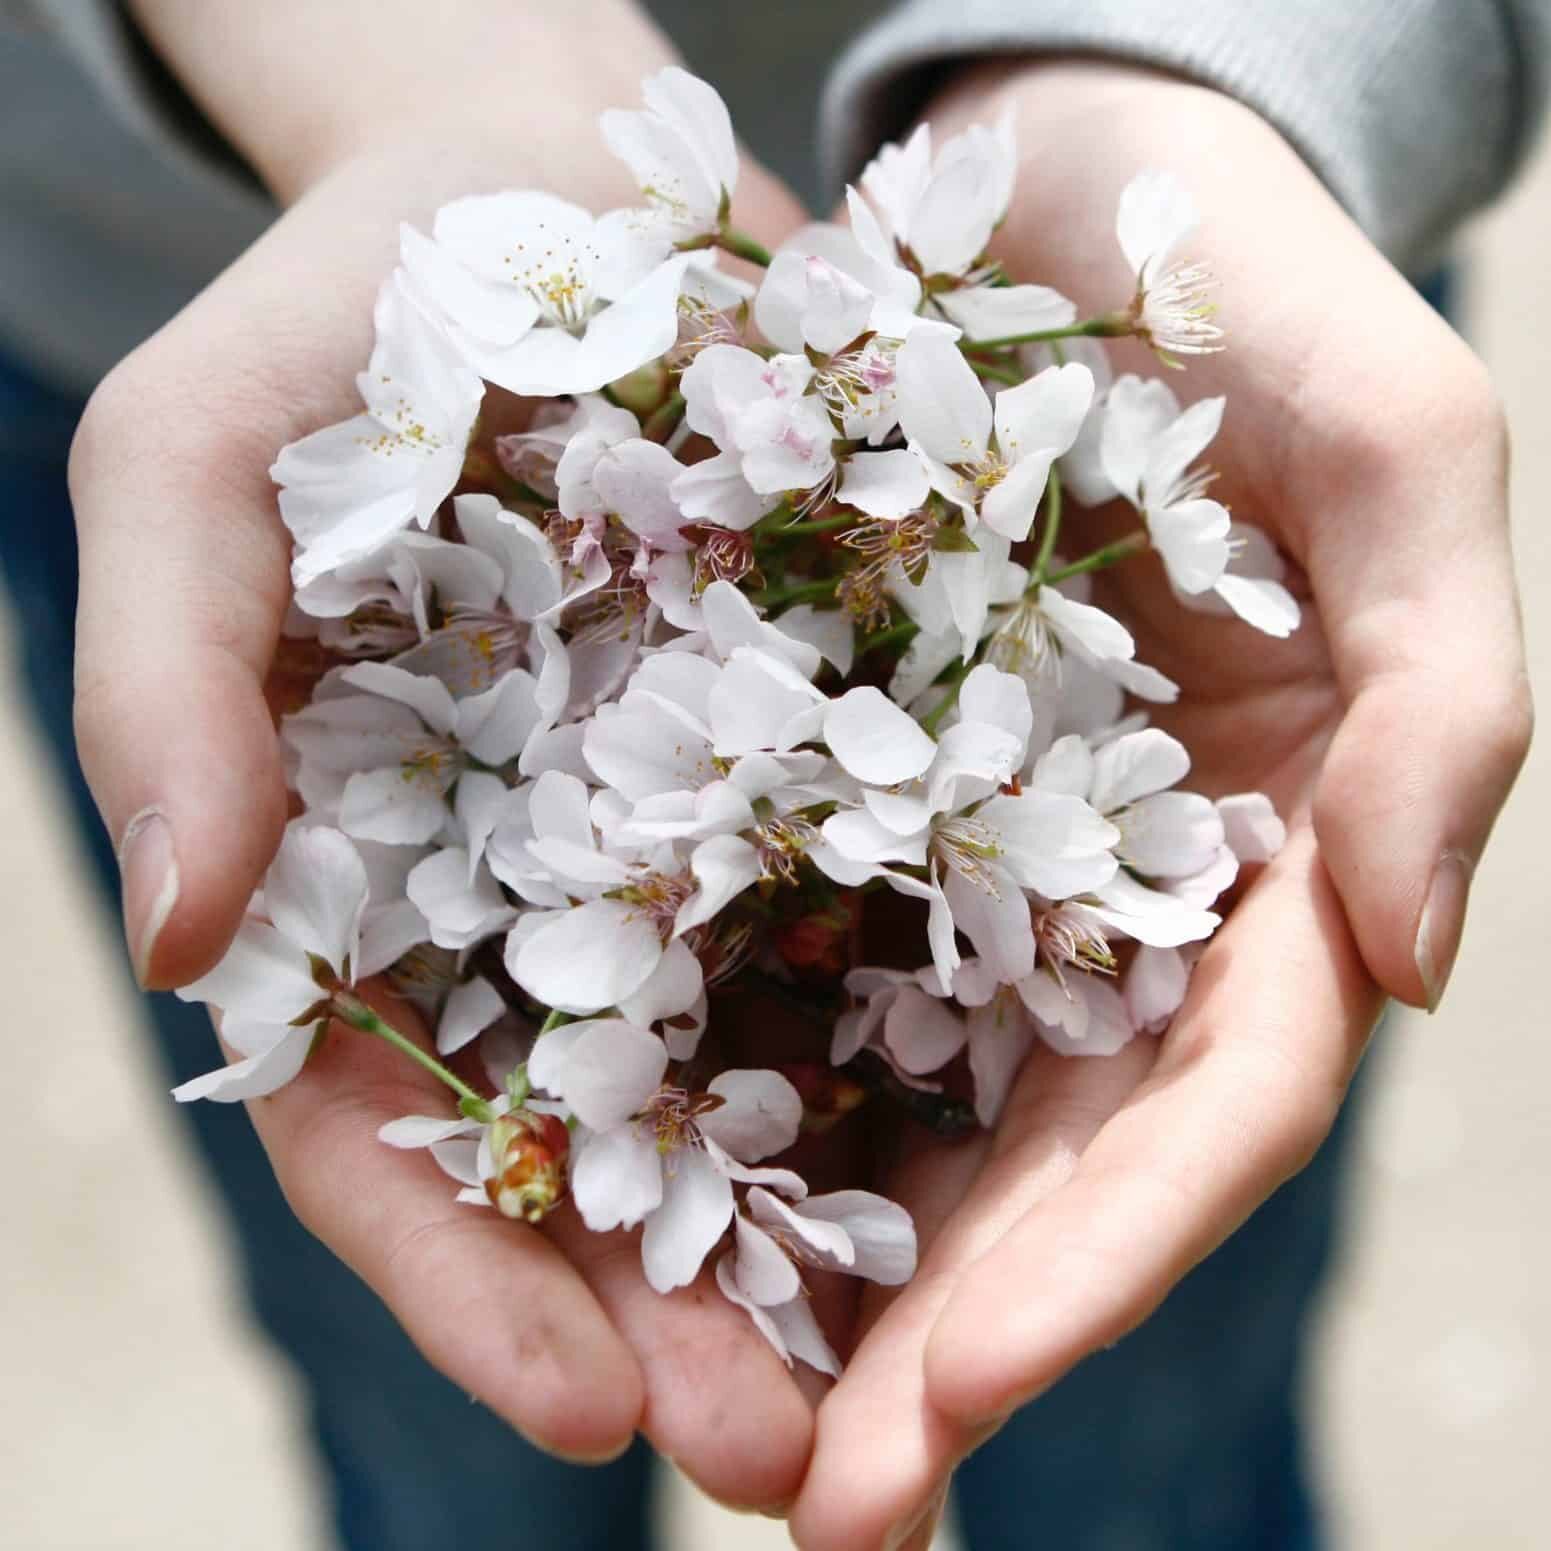 flowers on hands